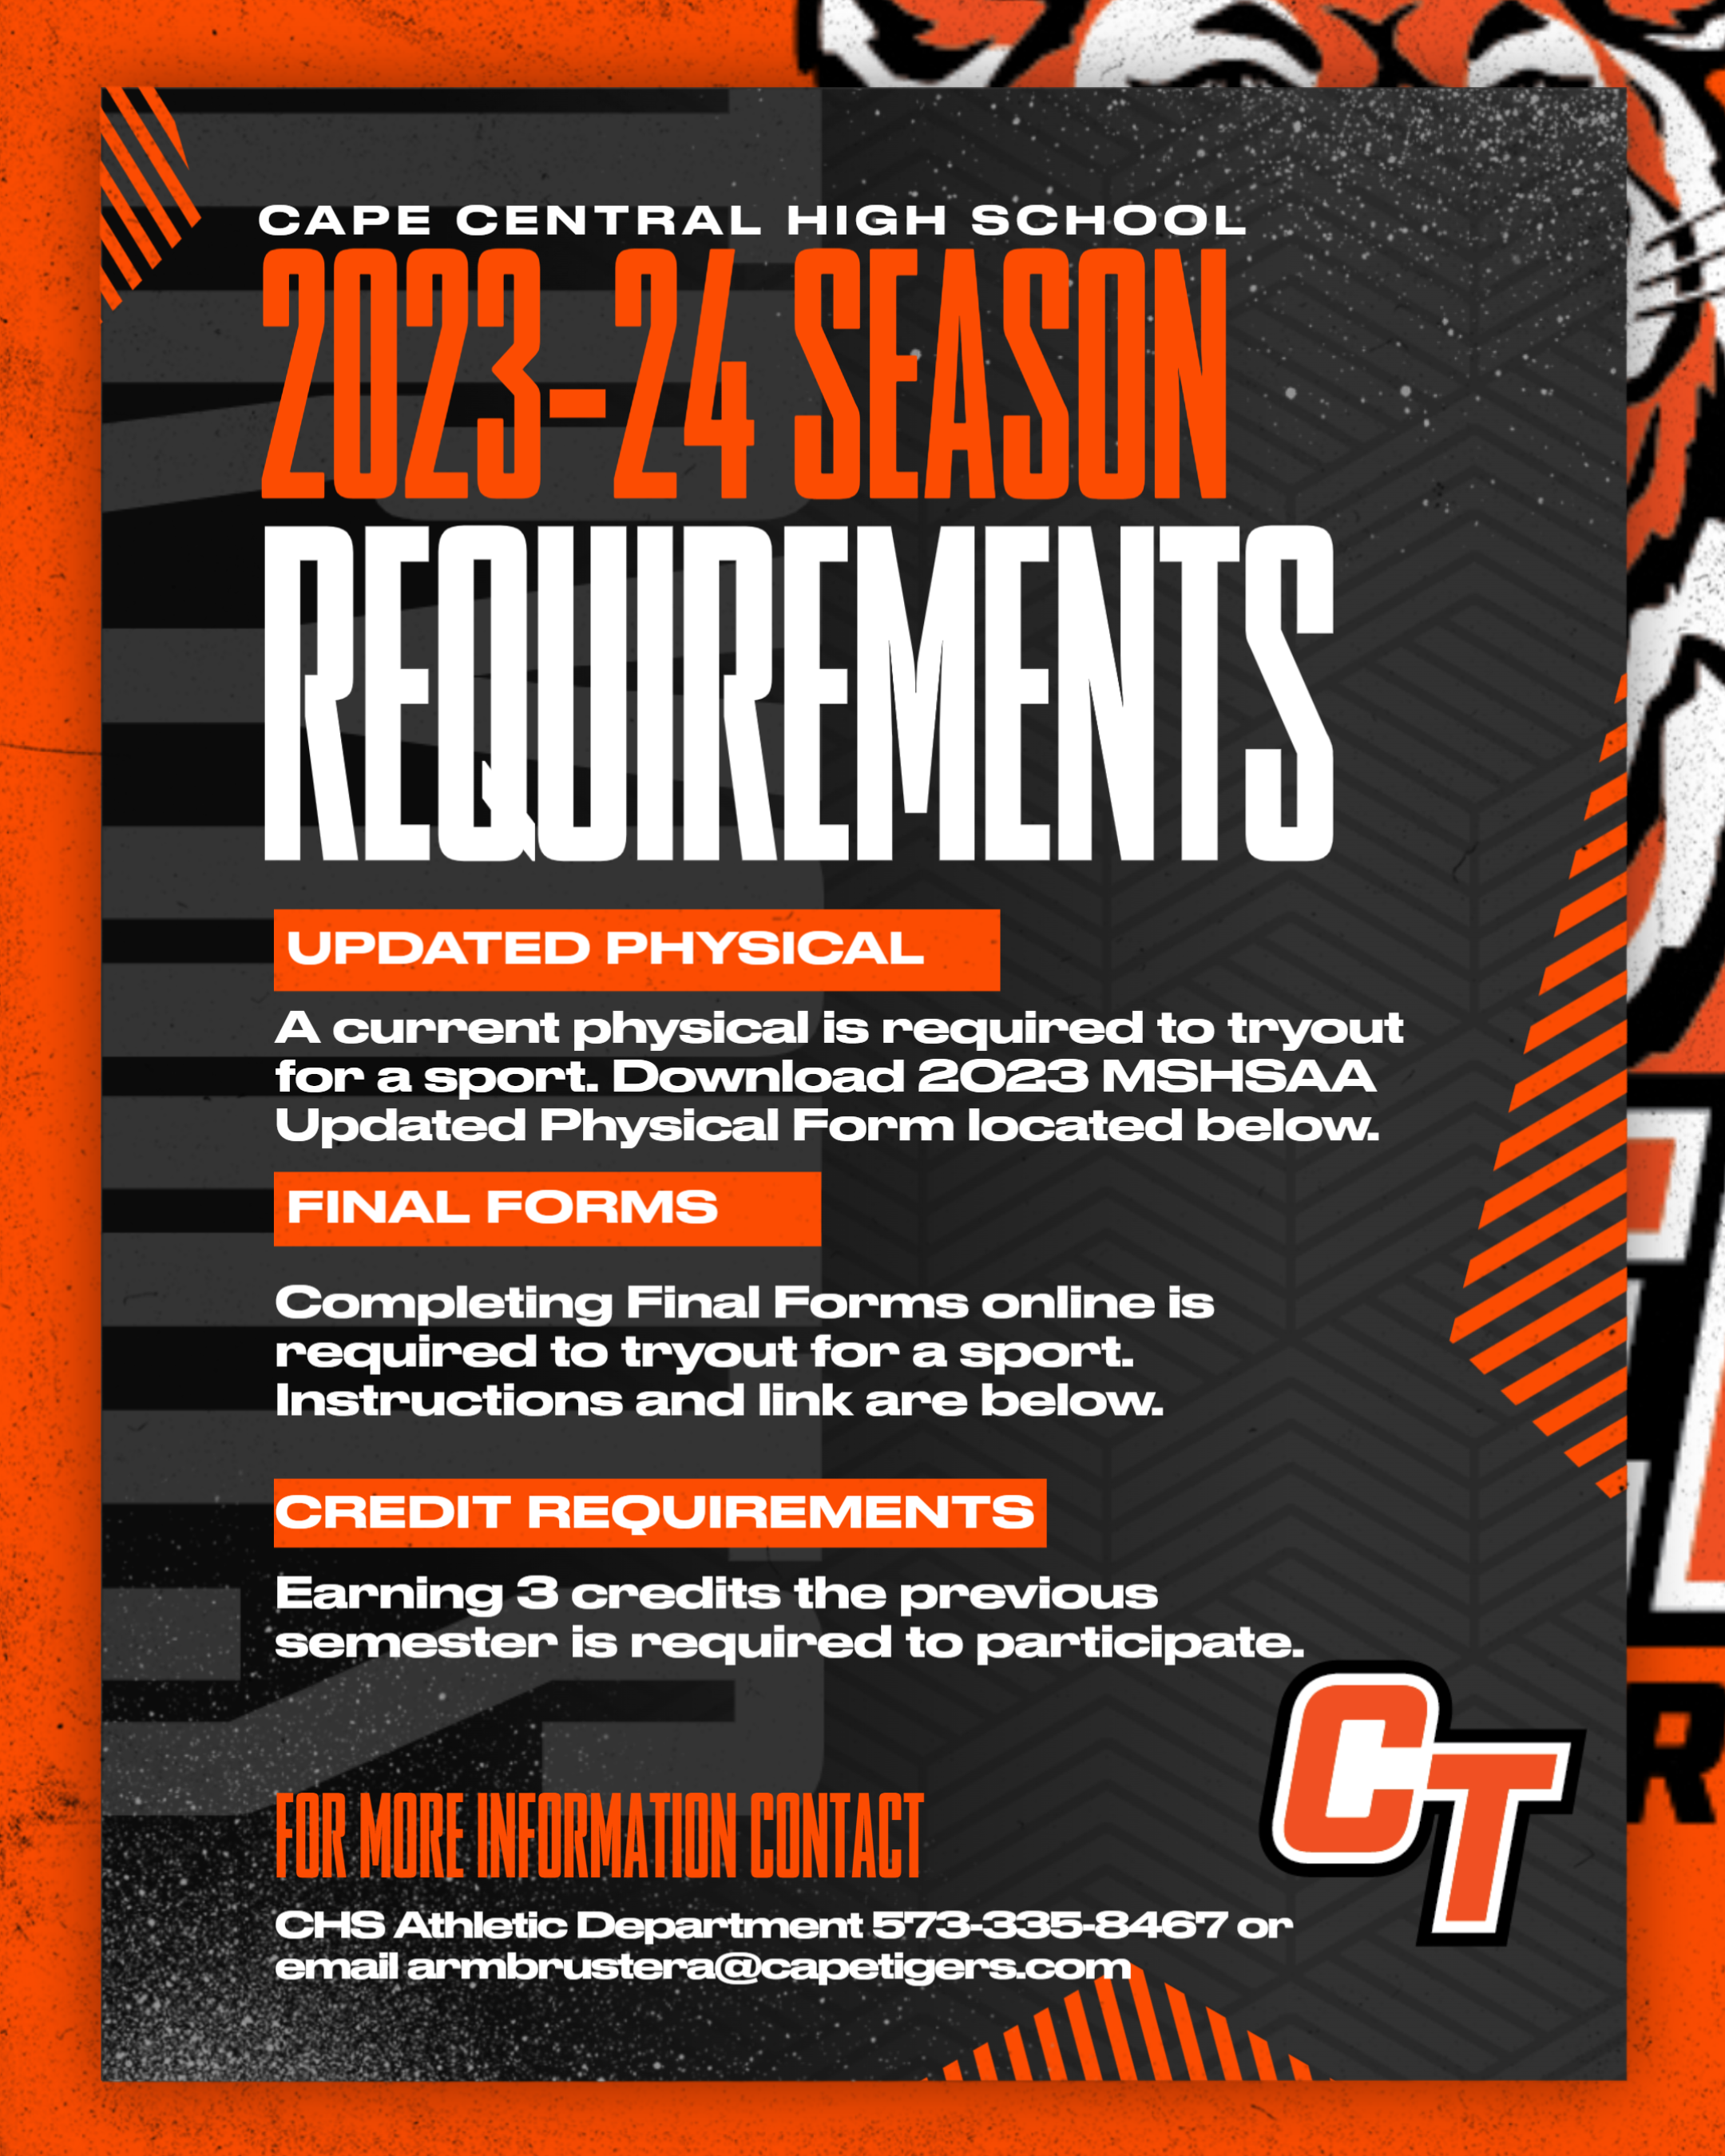 Tryout requirements